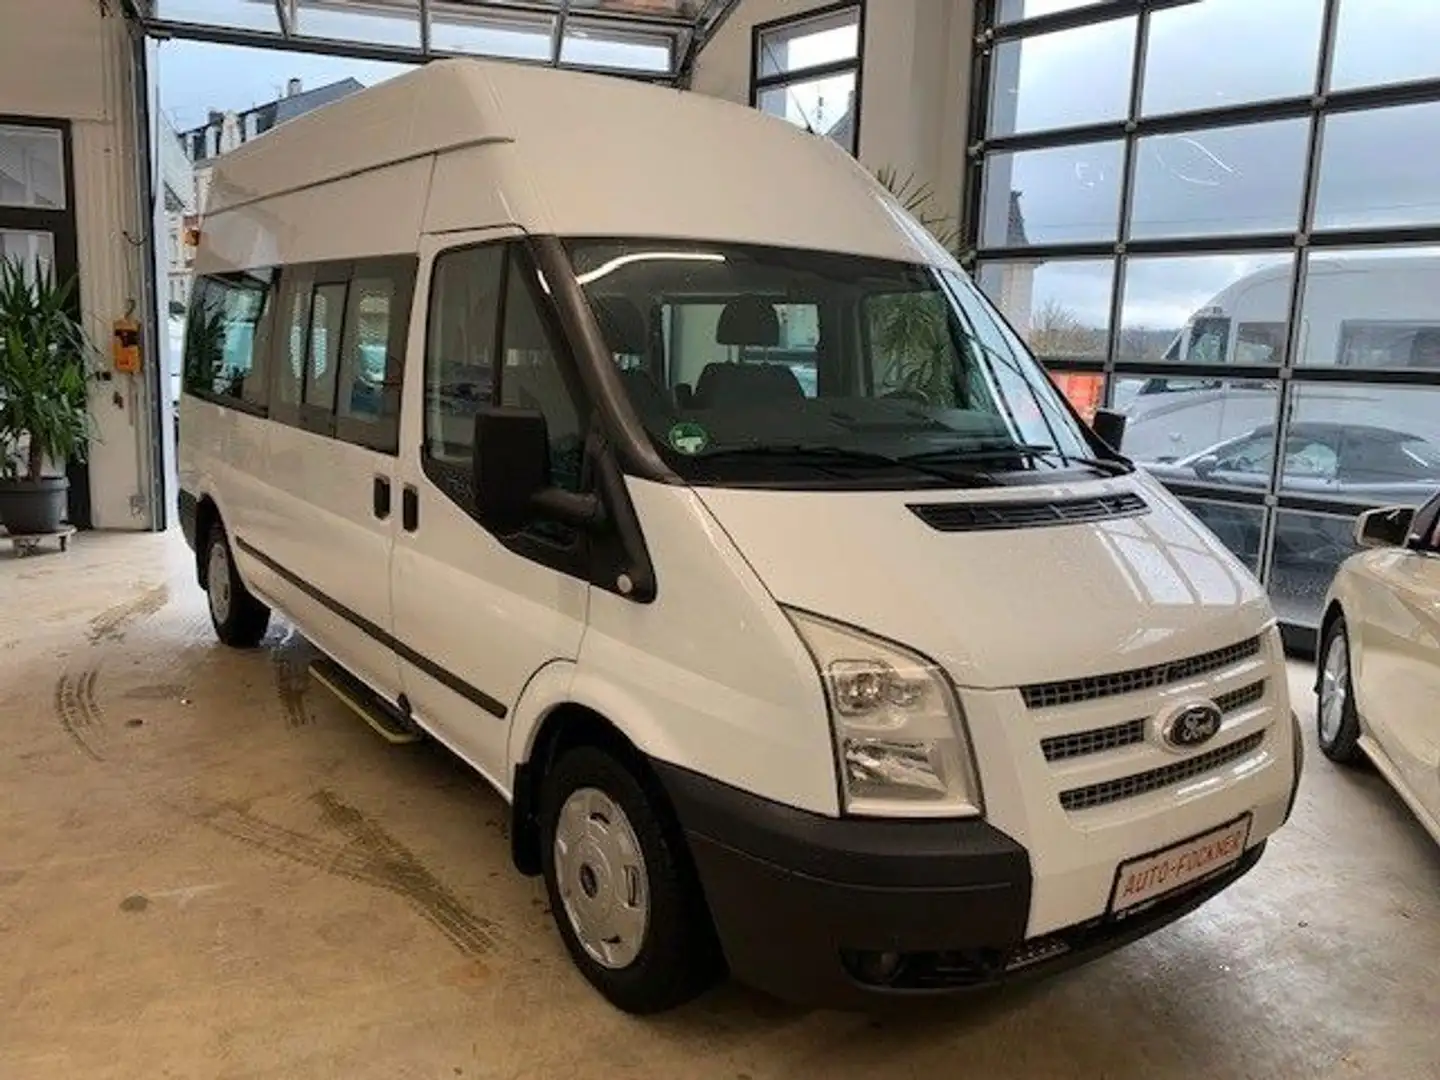 Ford Transit 2.2 TDCi extrahoch lang Lift Systemboden Beyaz - 1